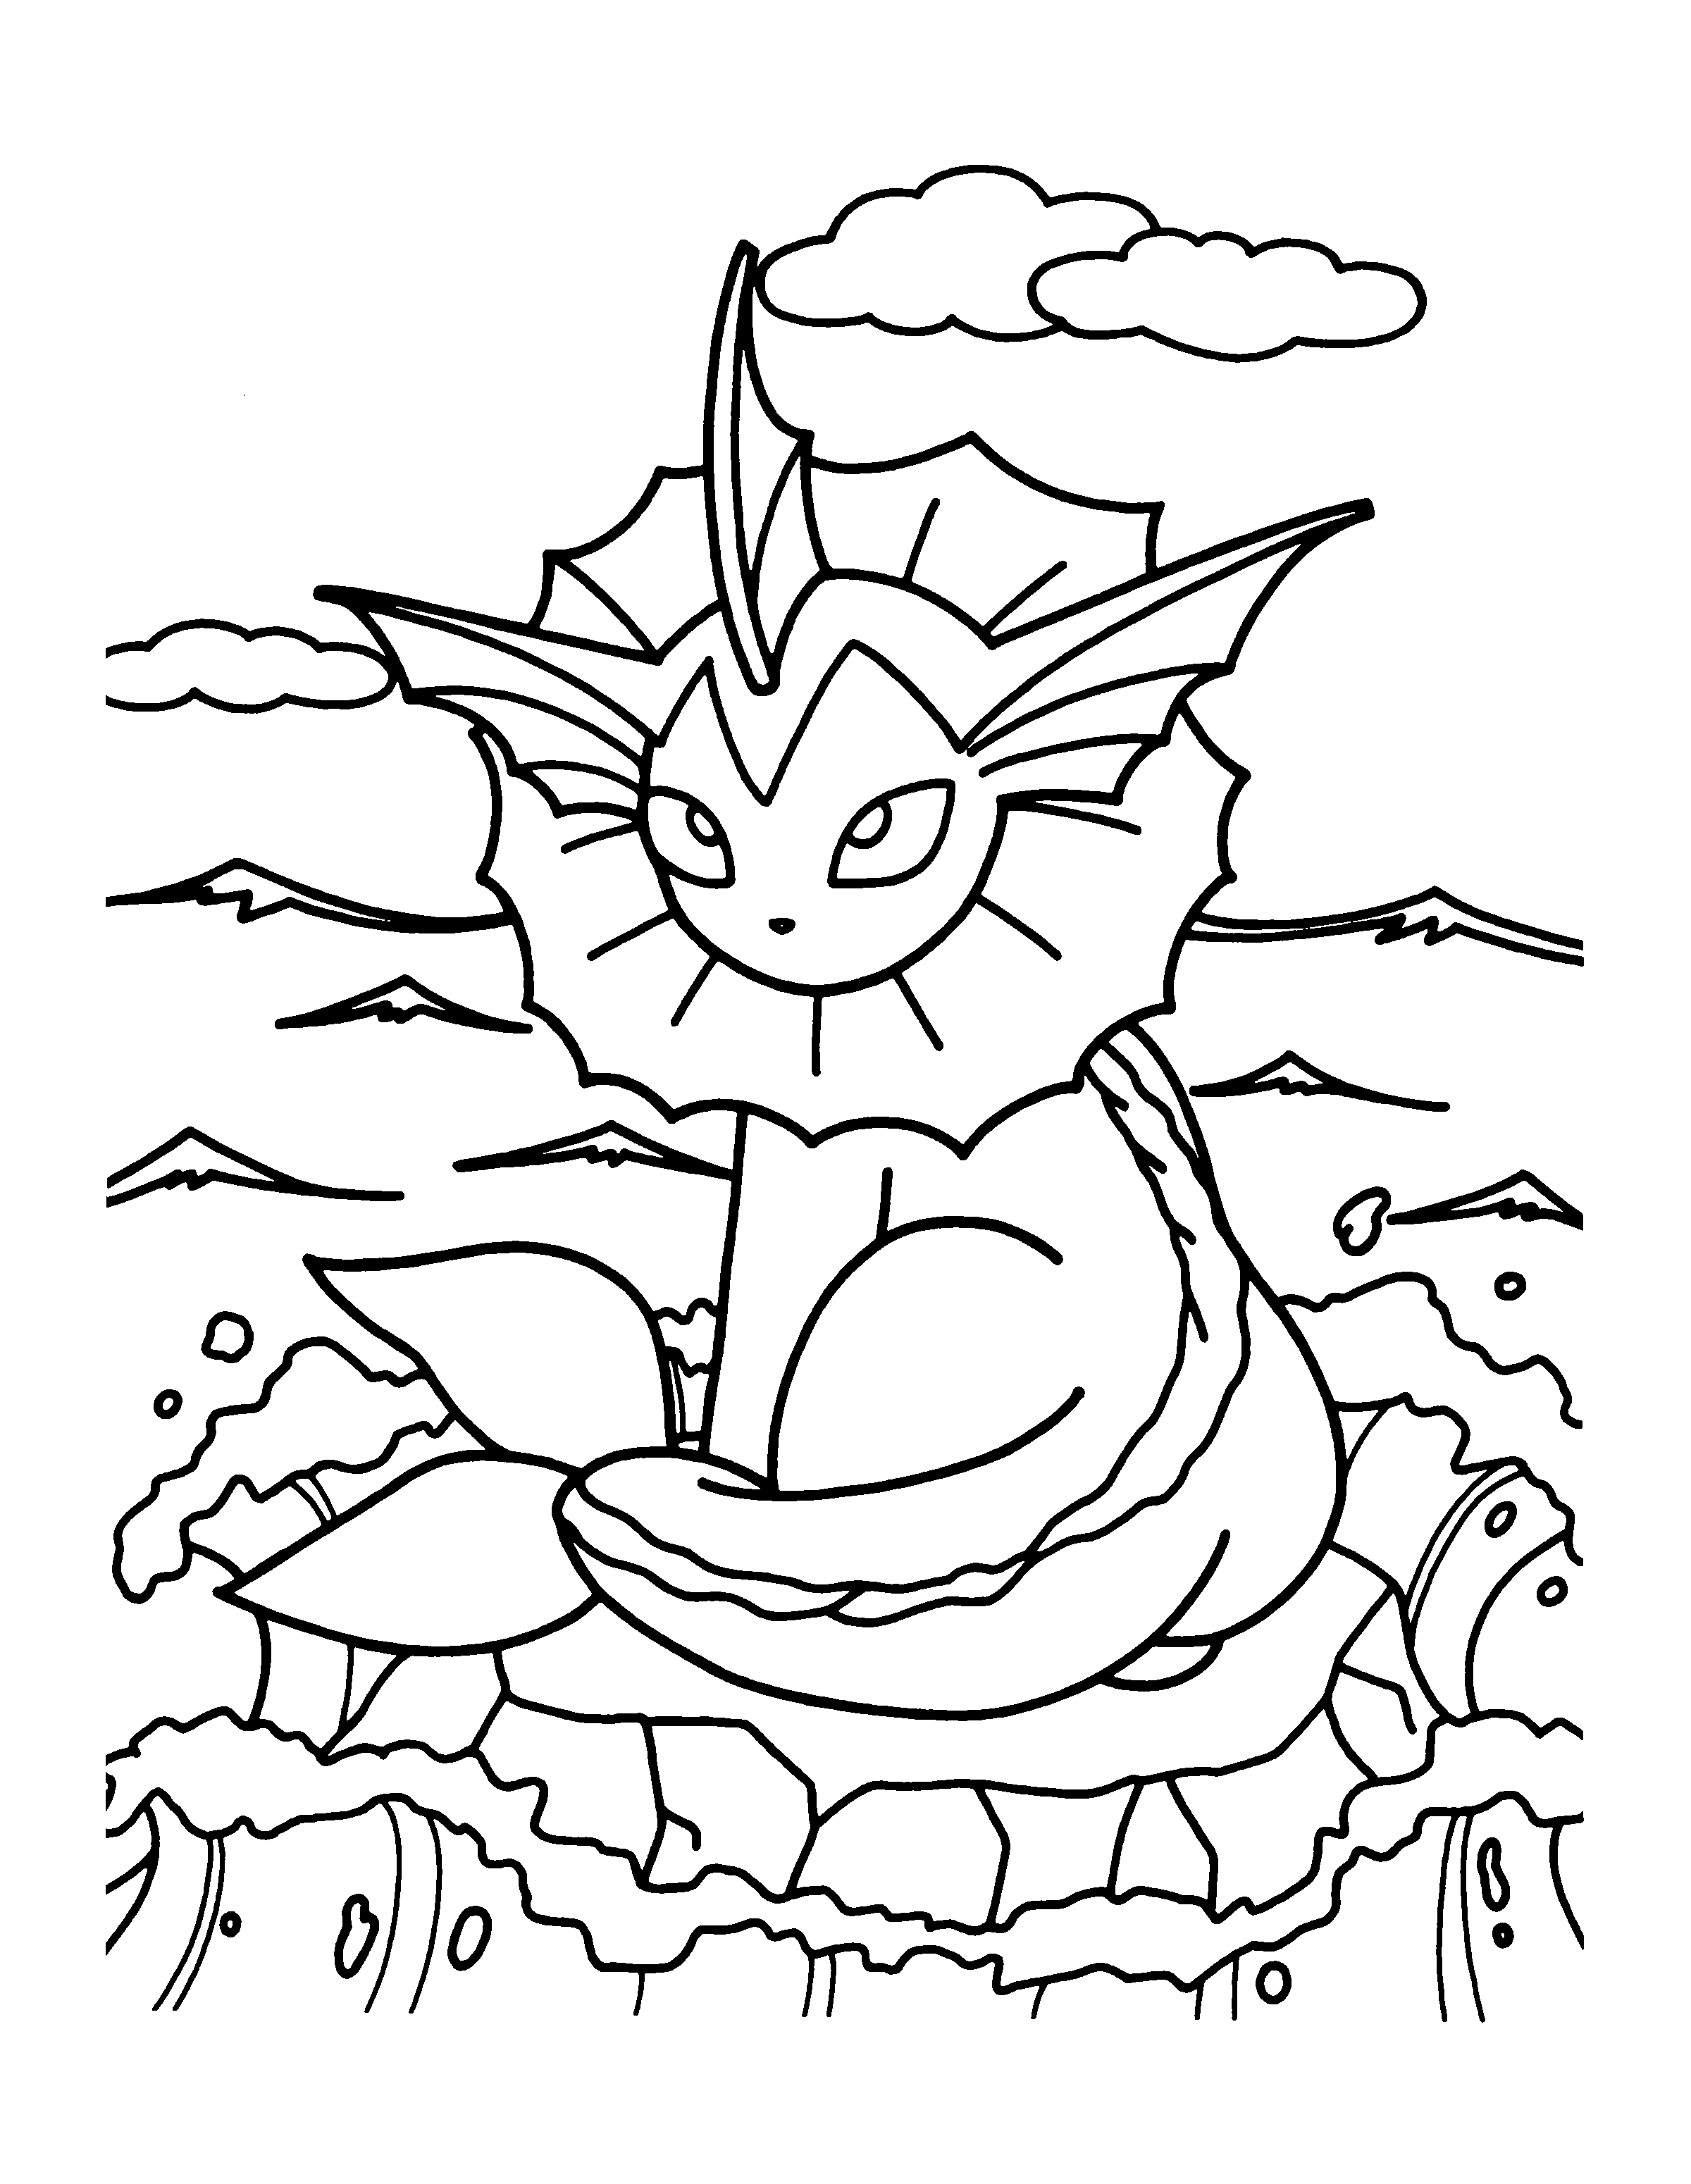  Pokemon coloring pages | Kids coloring pages | #20